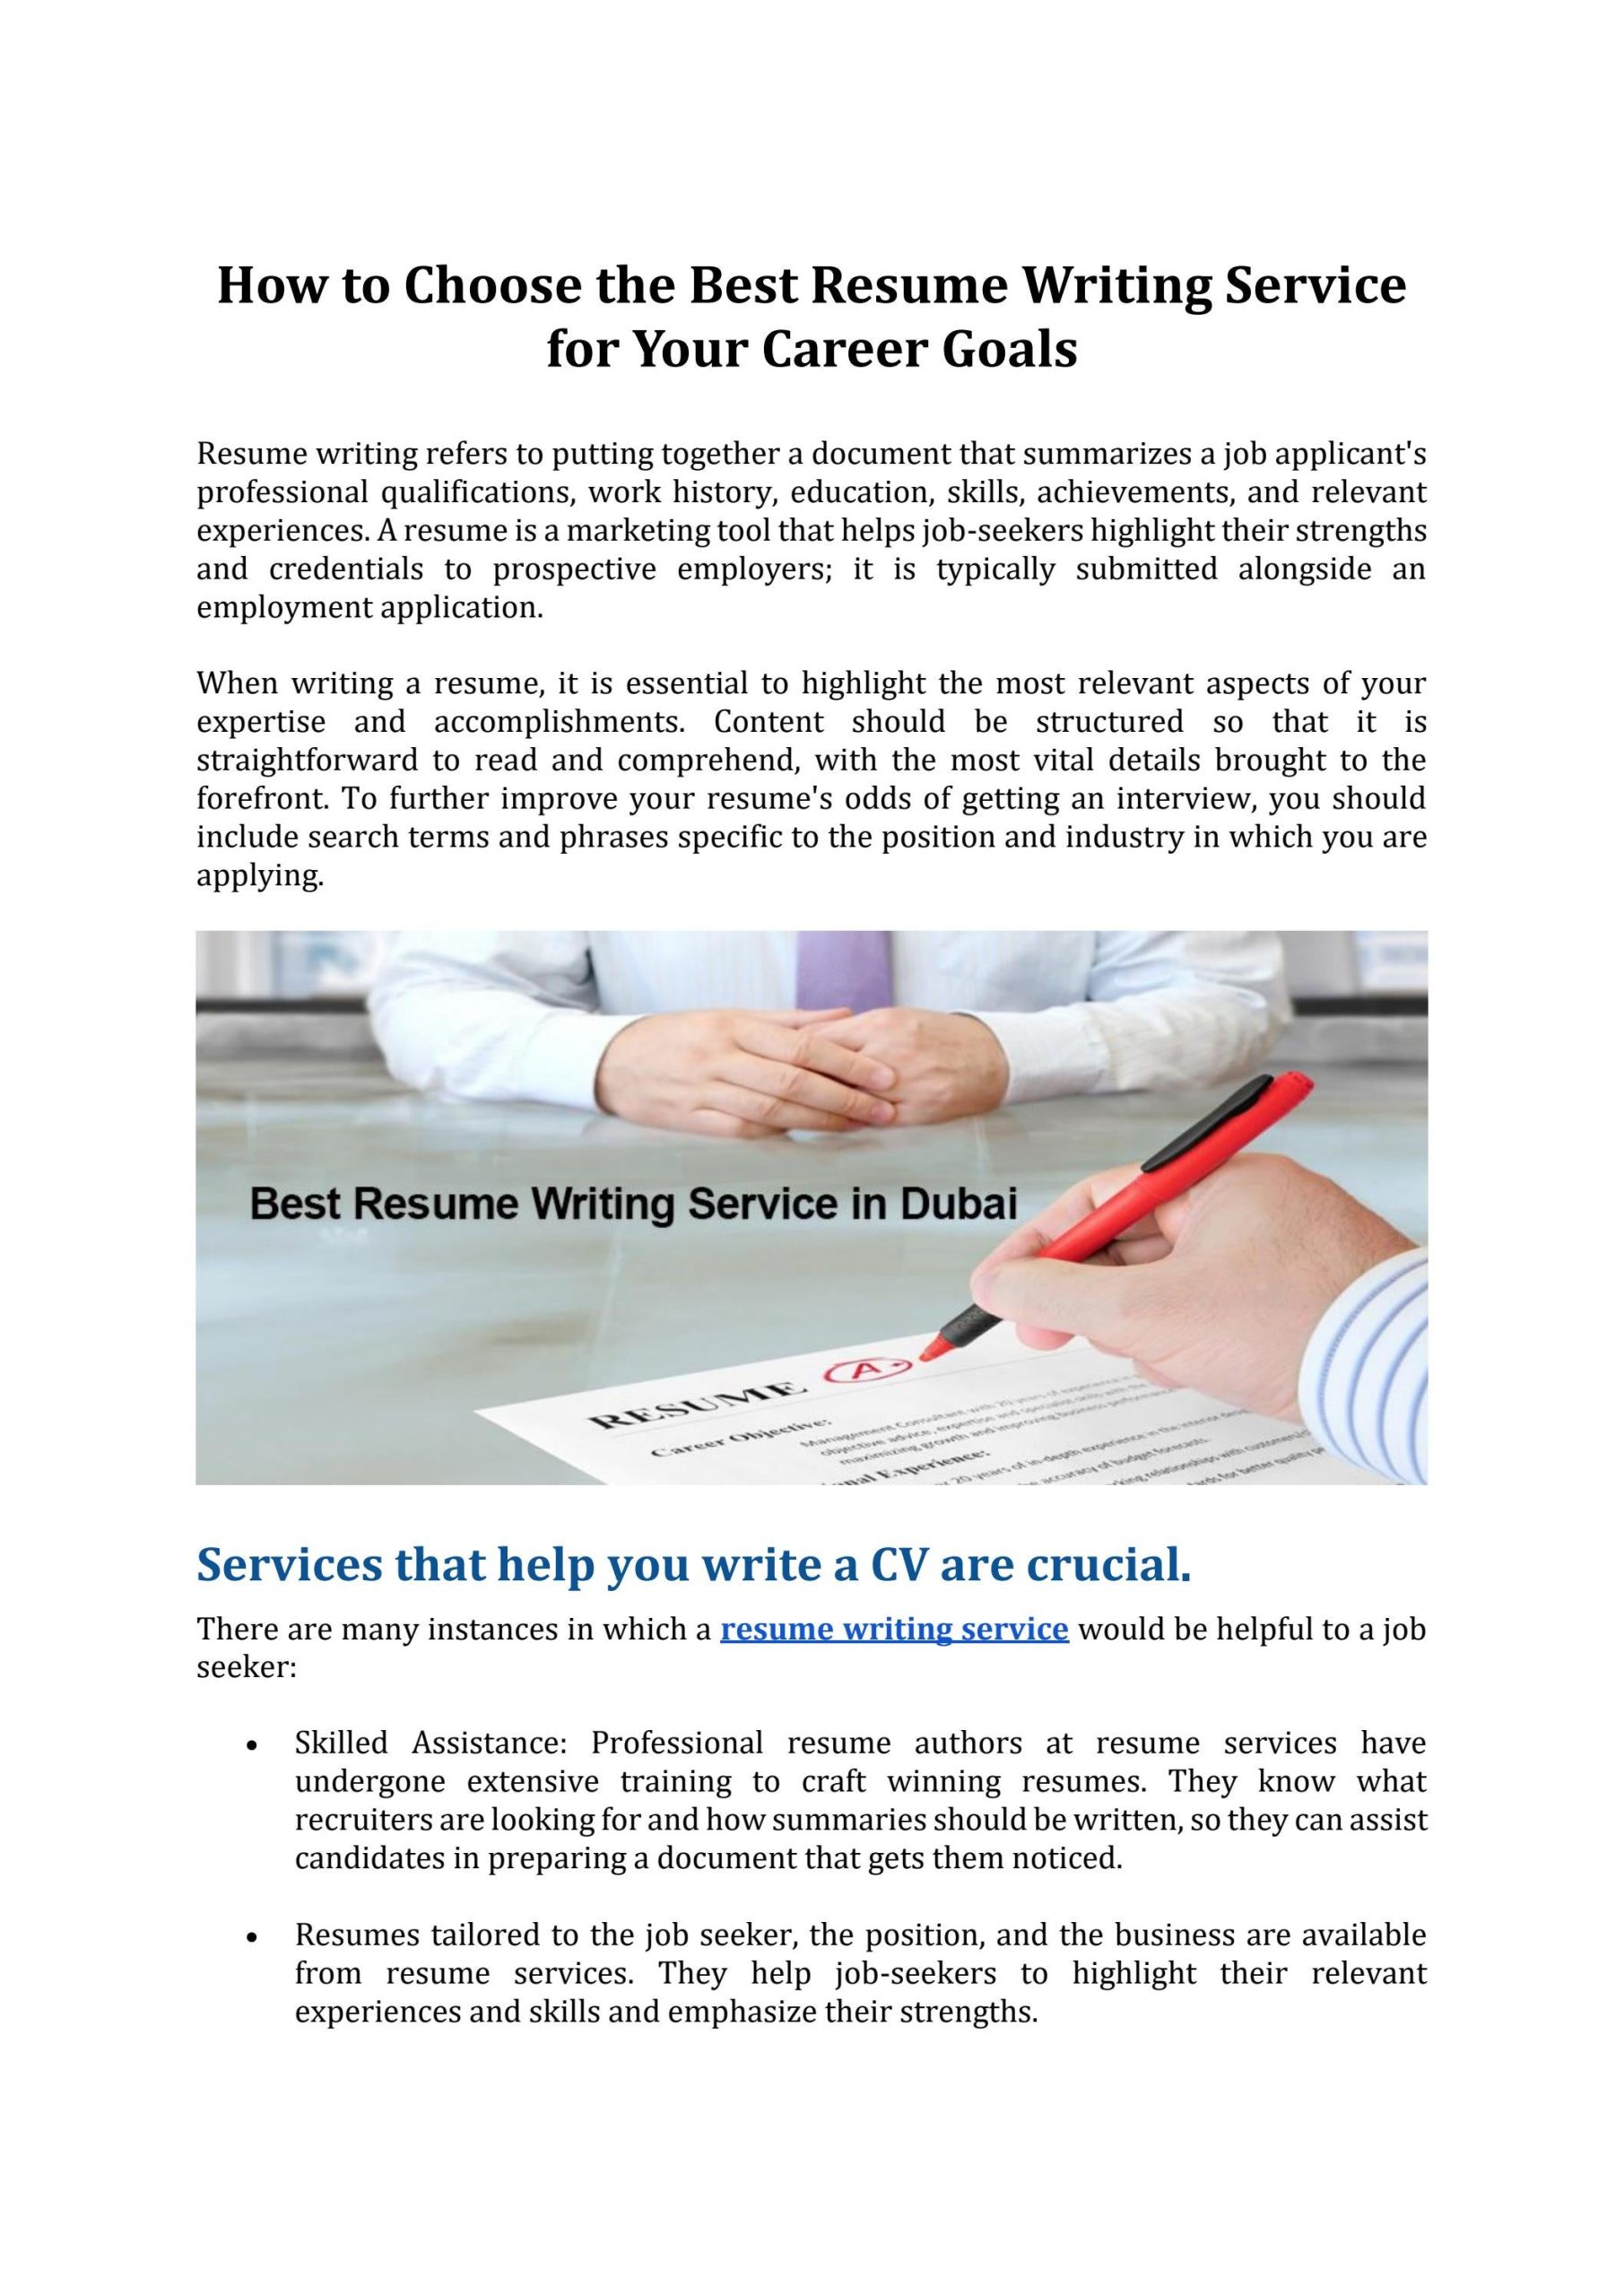 Resume Writing Service: How to Choose the Best One for Your Career Goals